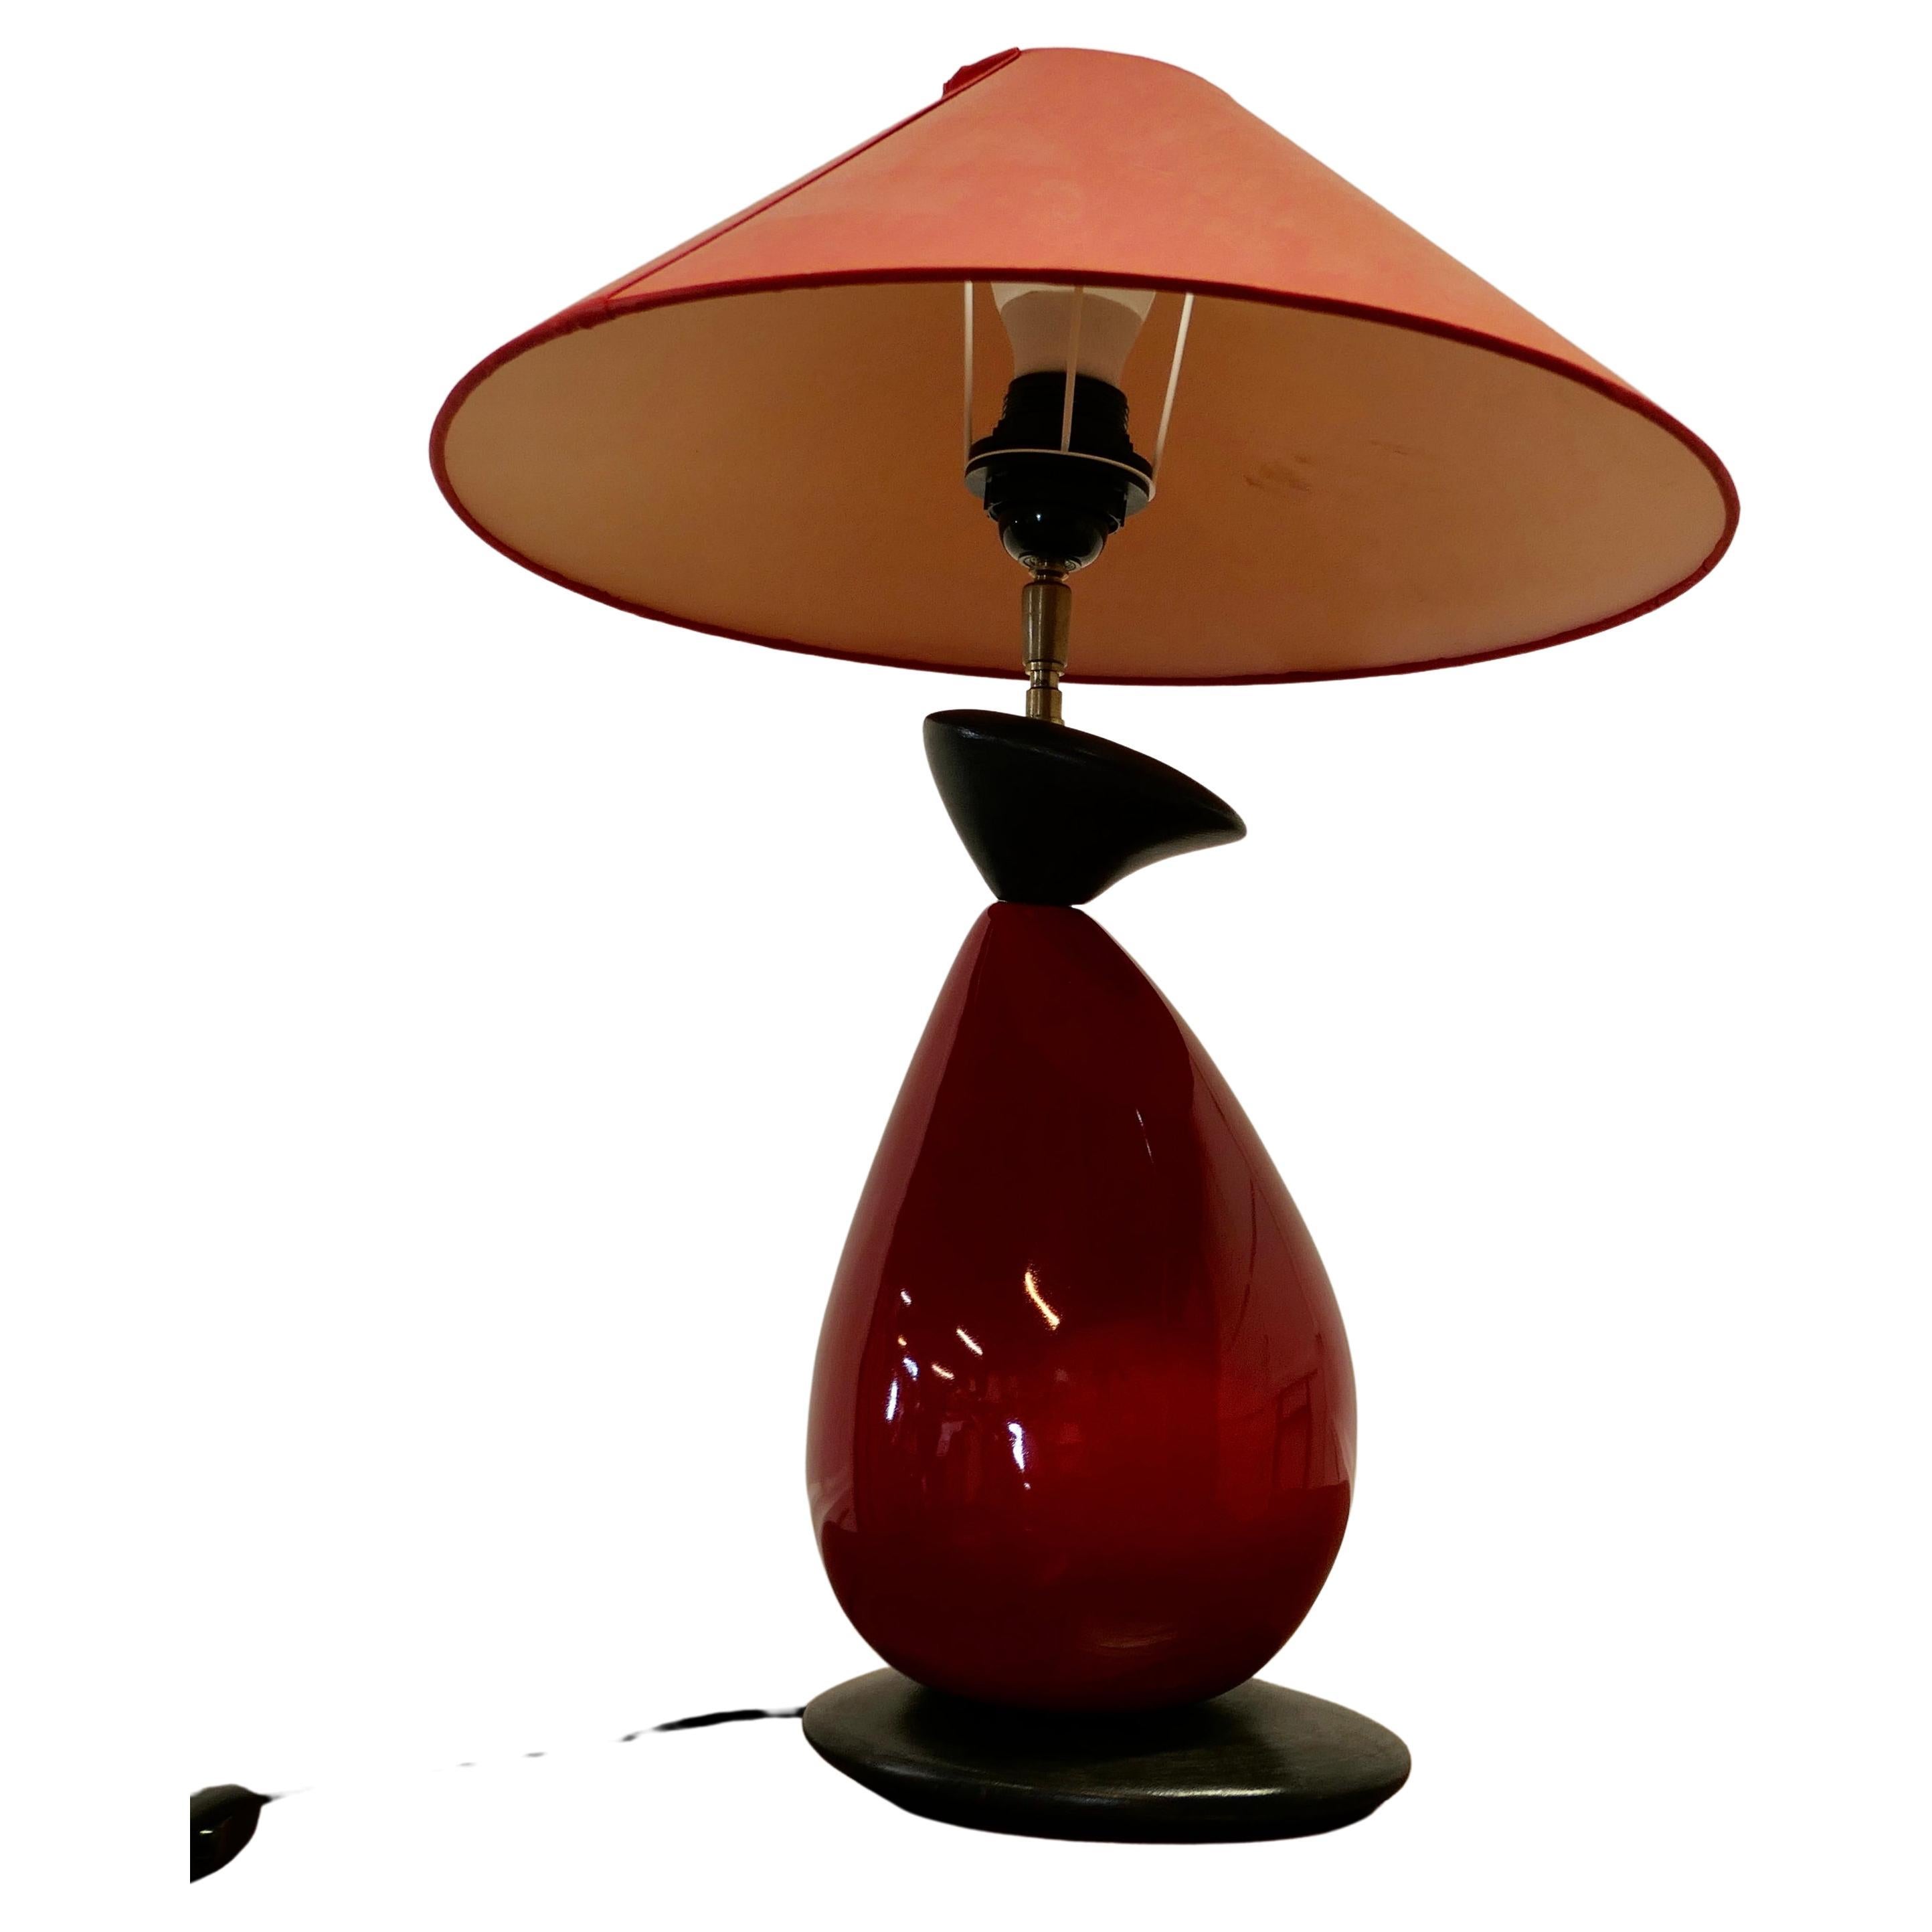 Francois Chatain Pebble Lamp from France a Charming Piece in Dark Red and Black